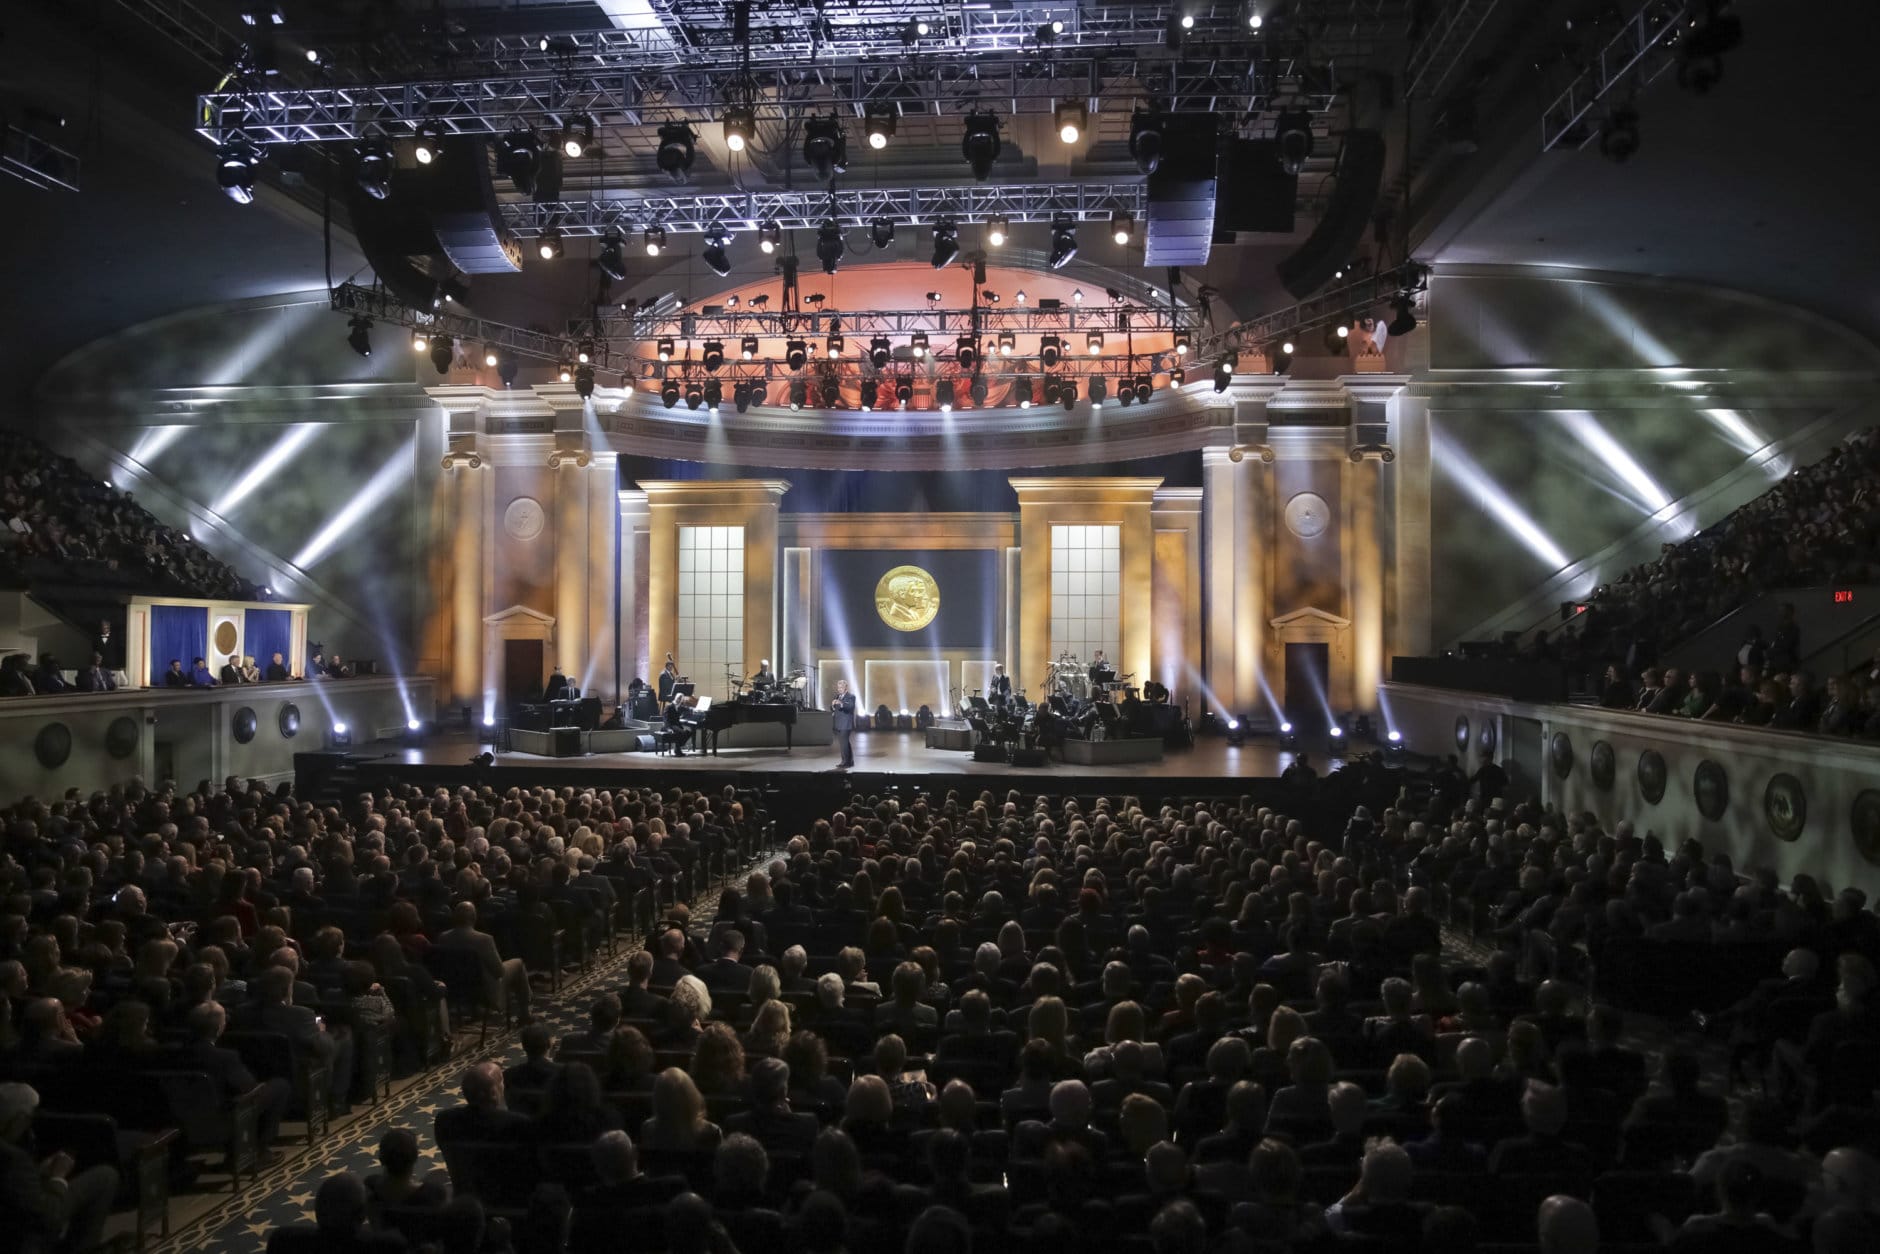 A general view of The 2017 Gershwin Prize Tribute Concert honoring singer Tony Bennett at the DAR Constitution Hall on Wednesday, Nov. 15, 2017 in Washington. (Photo by Brent N. Clarke/Invision/AP)